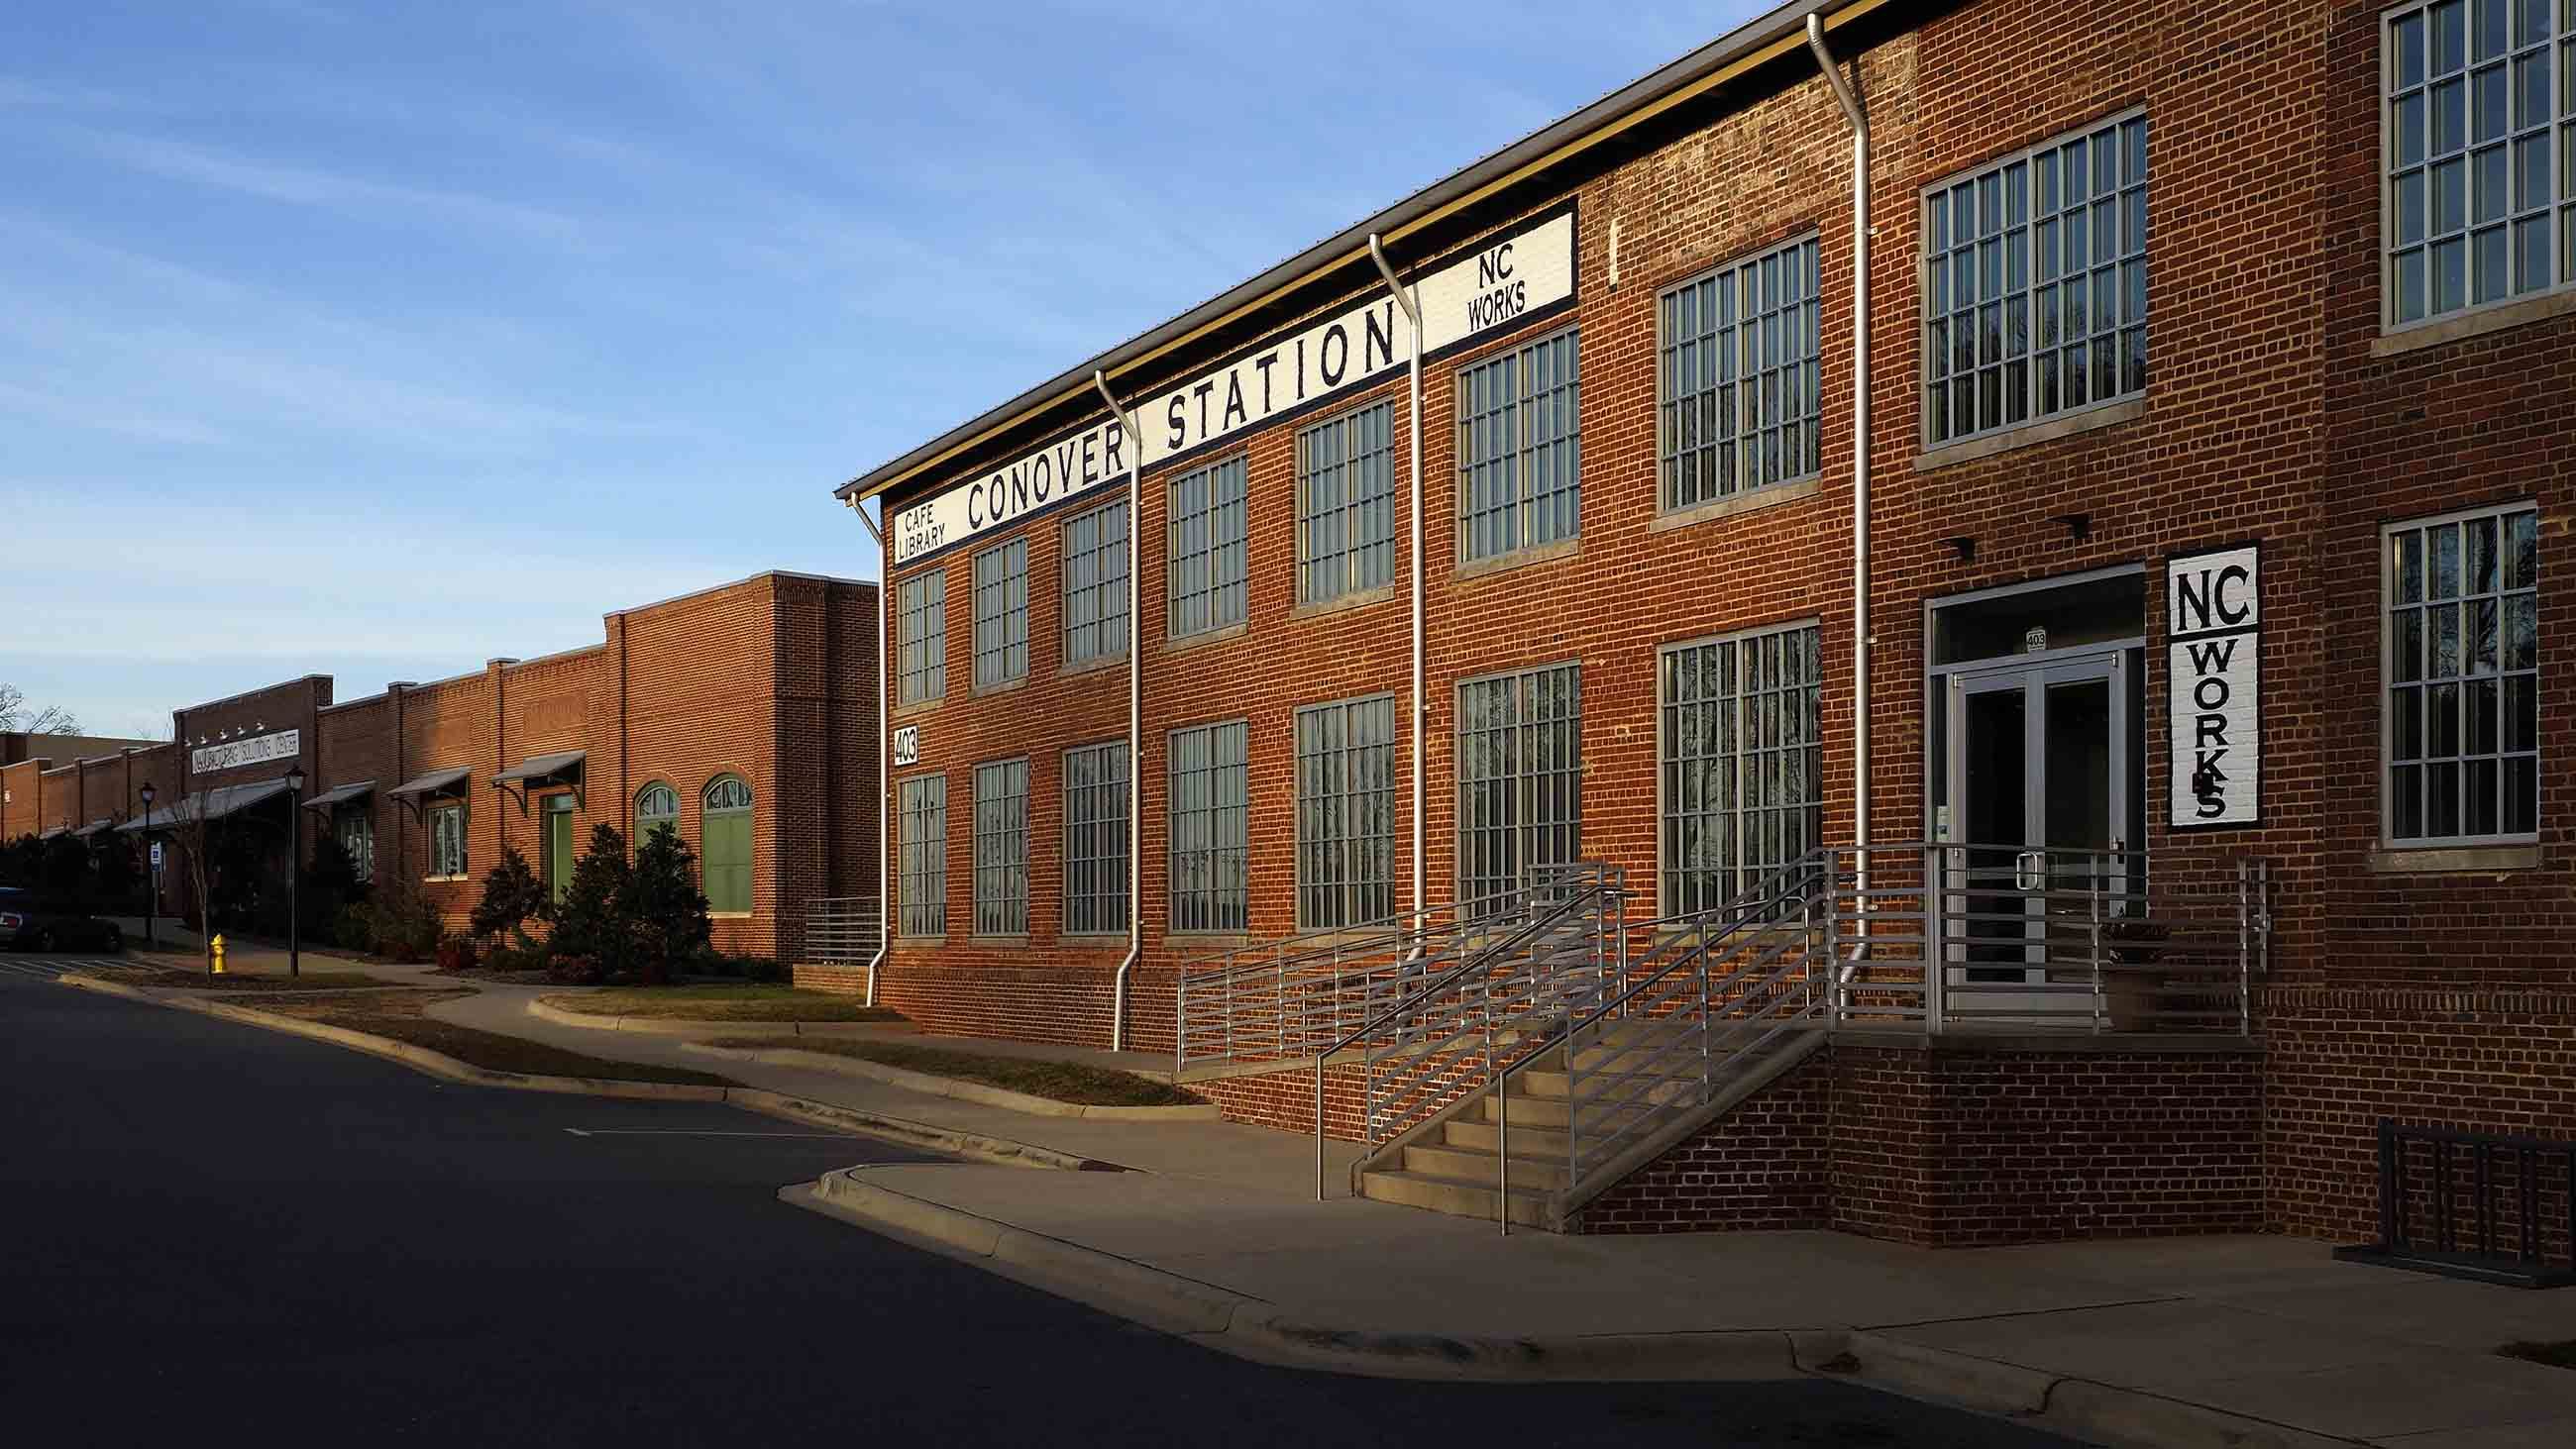 The Manufacturing Solutions Center is a sprawling innovation complex in Conover, providing research, training, and product testing for 1,500 companies worldwide. The building was designed to resemble the classic fabric mills of the early 20th century, such as the renovated Warlong Glove Manufacturing building seen here. Image by Larry C. Price. 